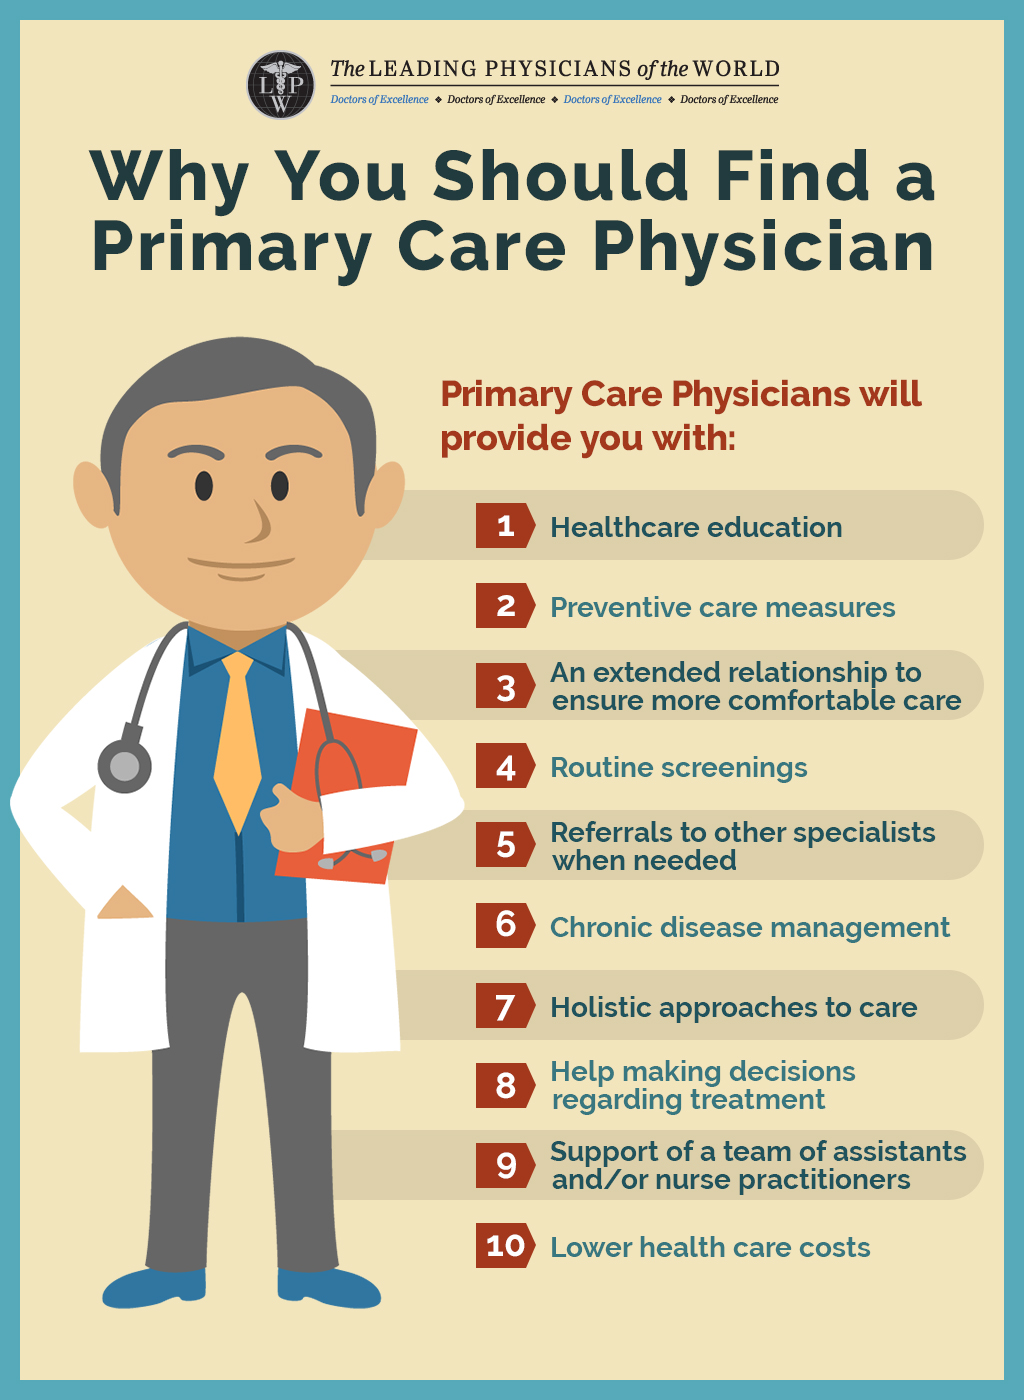 Why you should find a Primary Care Physician?